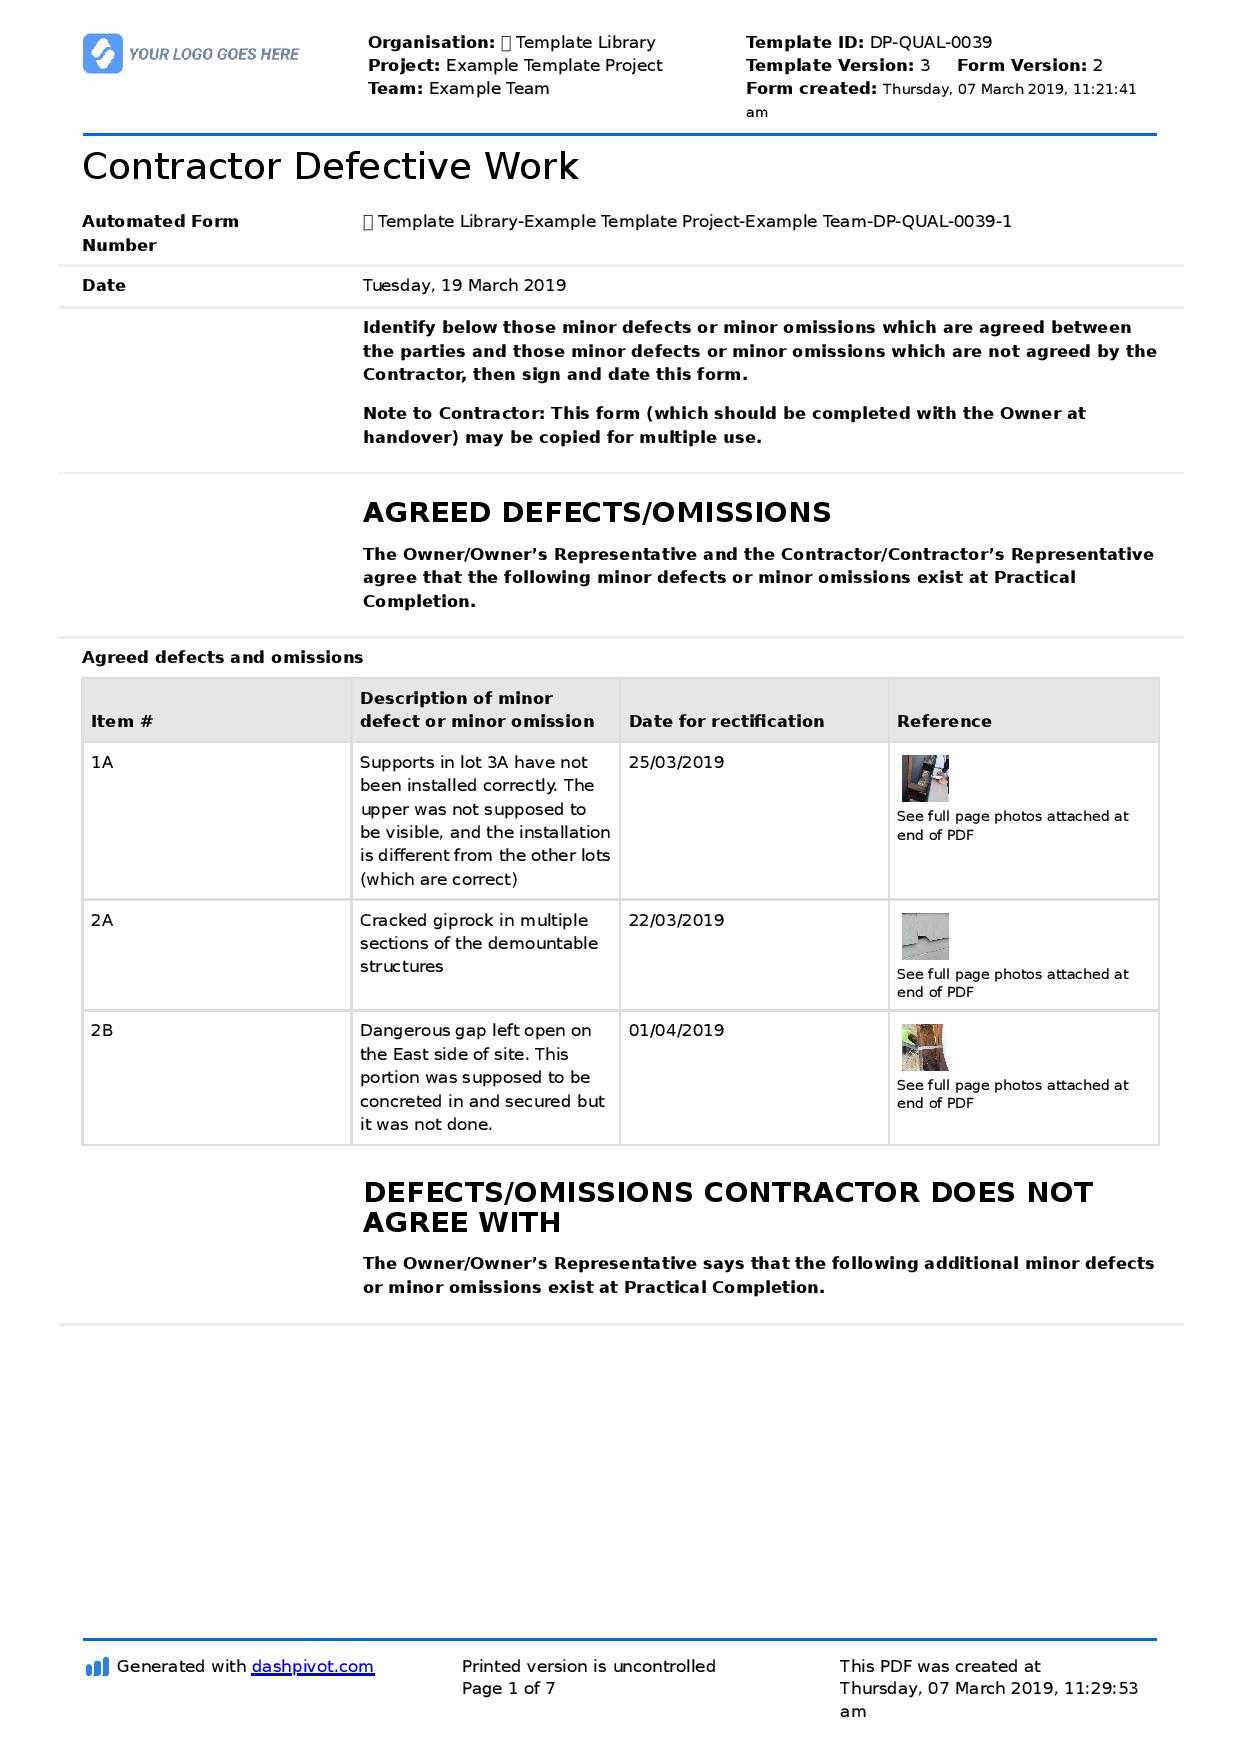 Letter To Contractor For Defective Work: Sample Letter And Inside Construction Deficiency Report Template